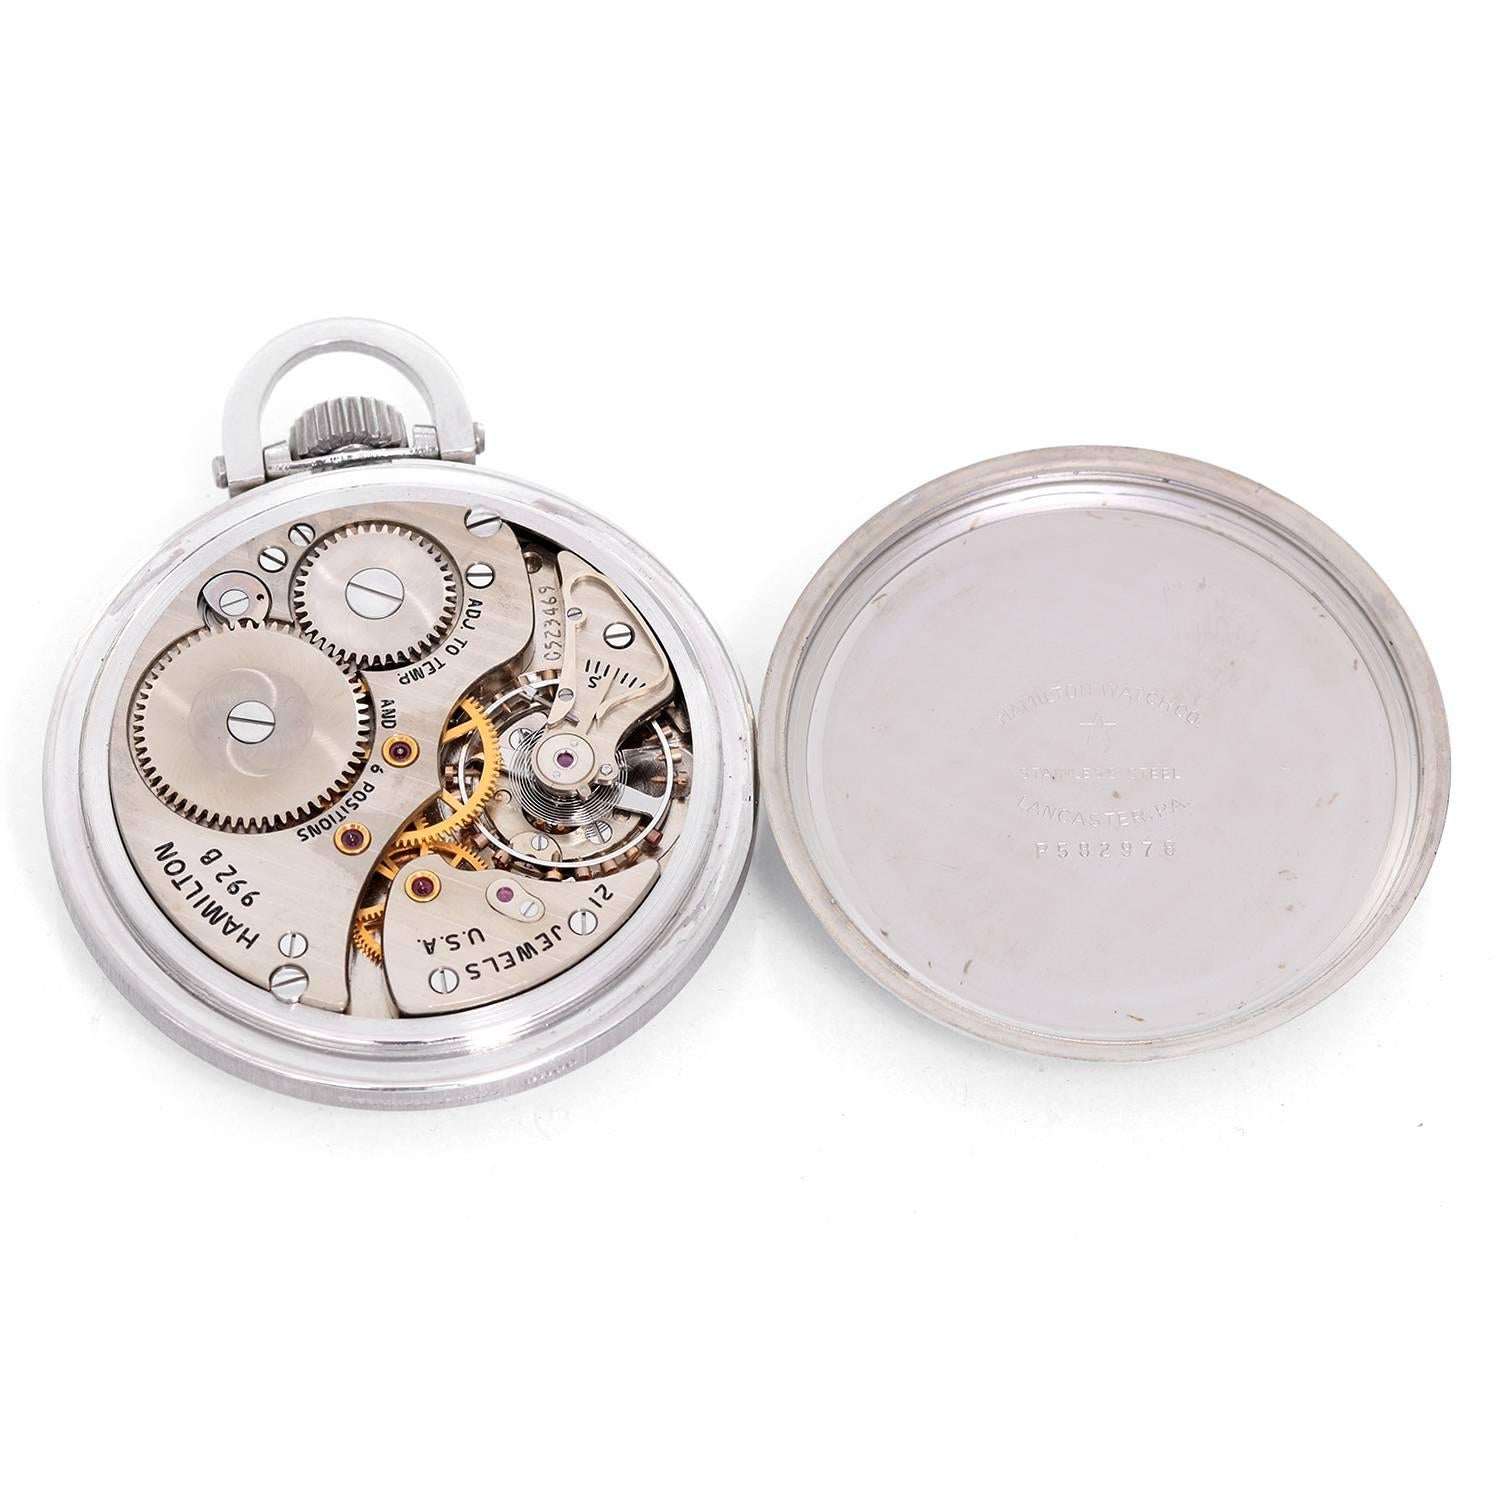 Hamilton Stainless Steel Railway Special Pocket Watch -  Manual winding; 21 jewels. Stainless steel case (50mm). White enamel Hamilton double sunk Montgomery dial, features ornate black Arabic hour numerals and block minute numerals. The dial is